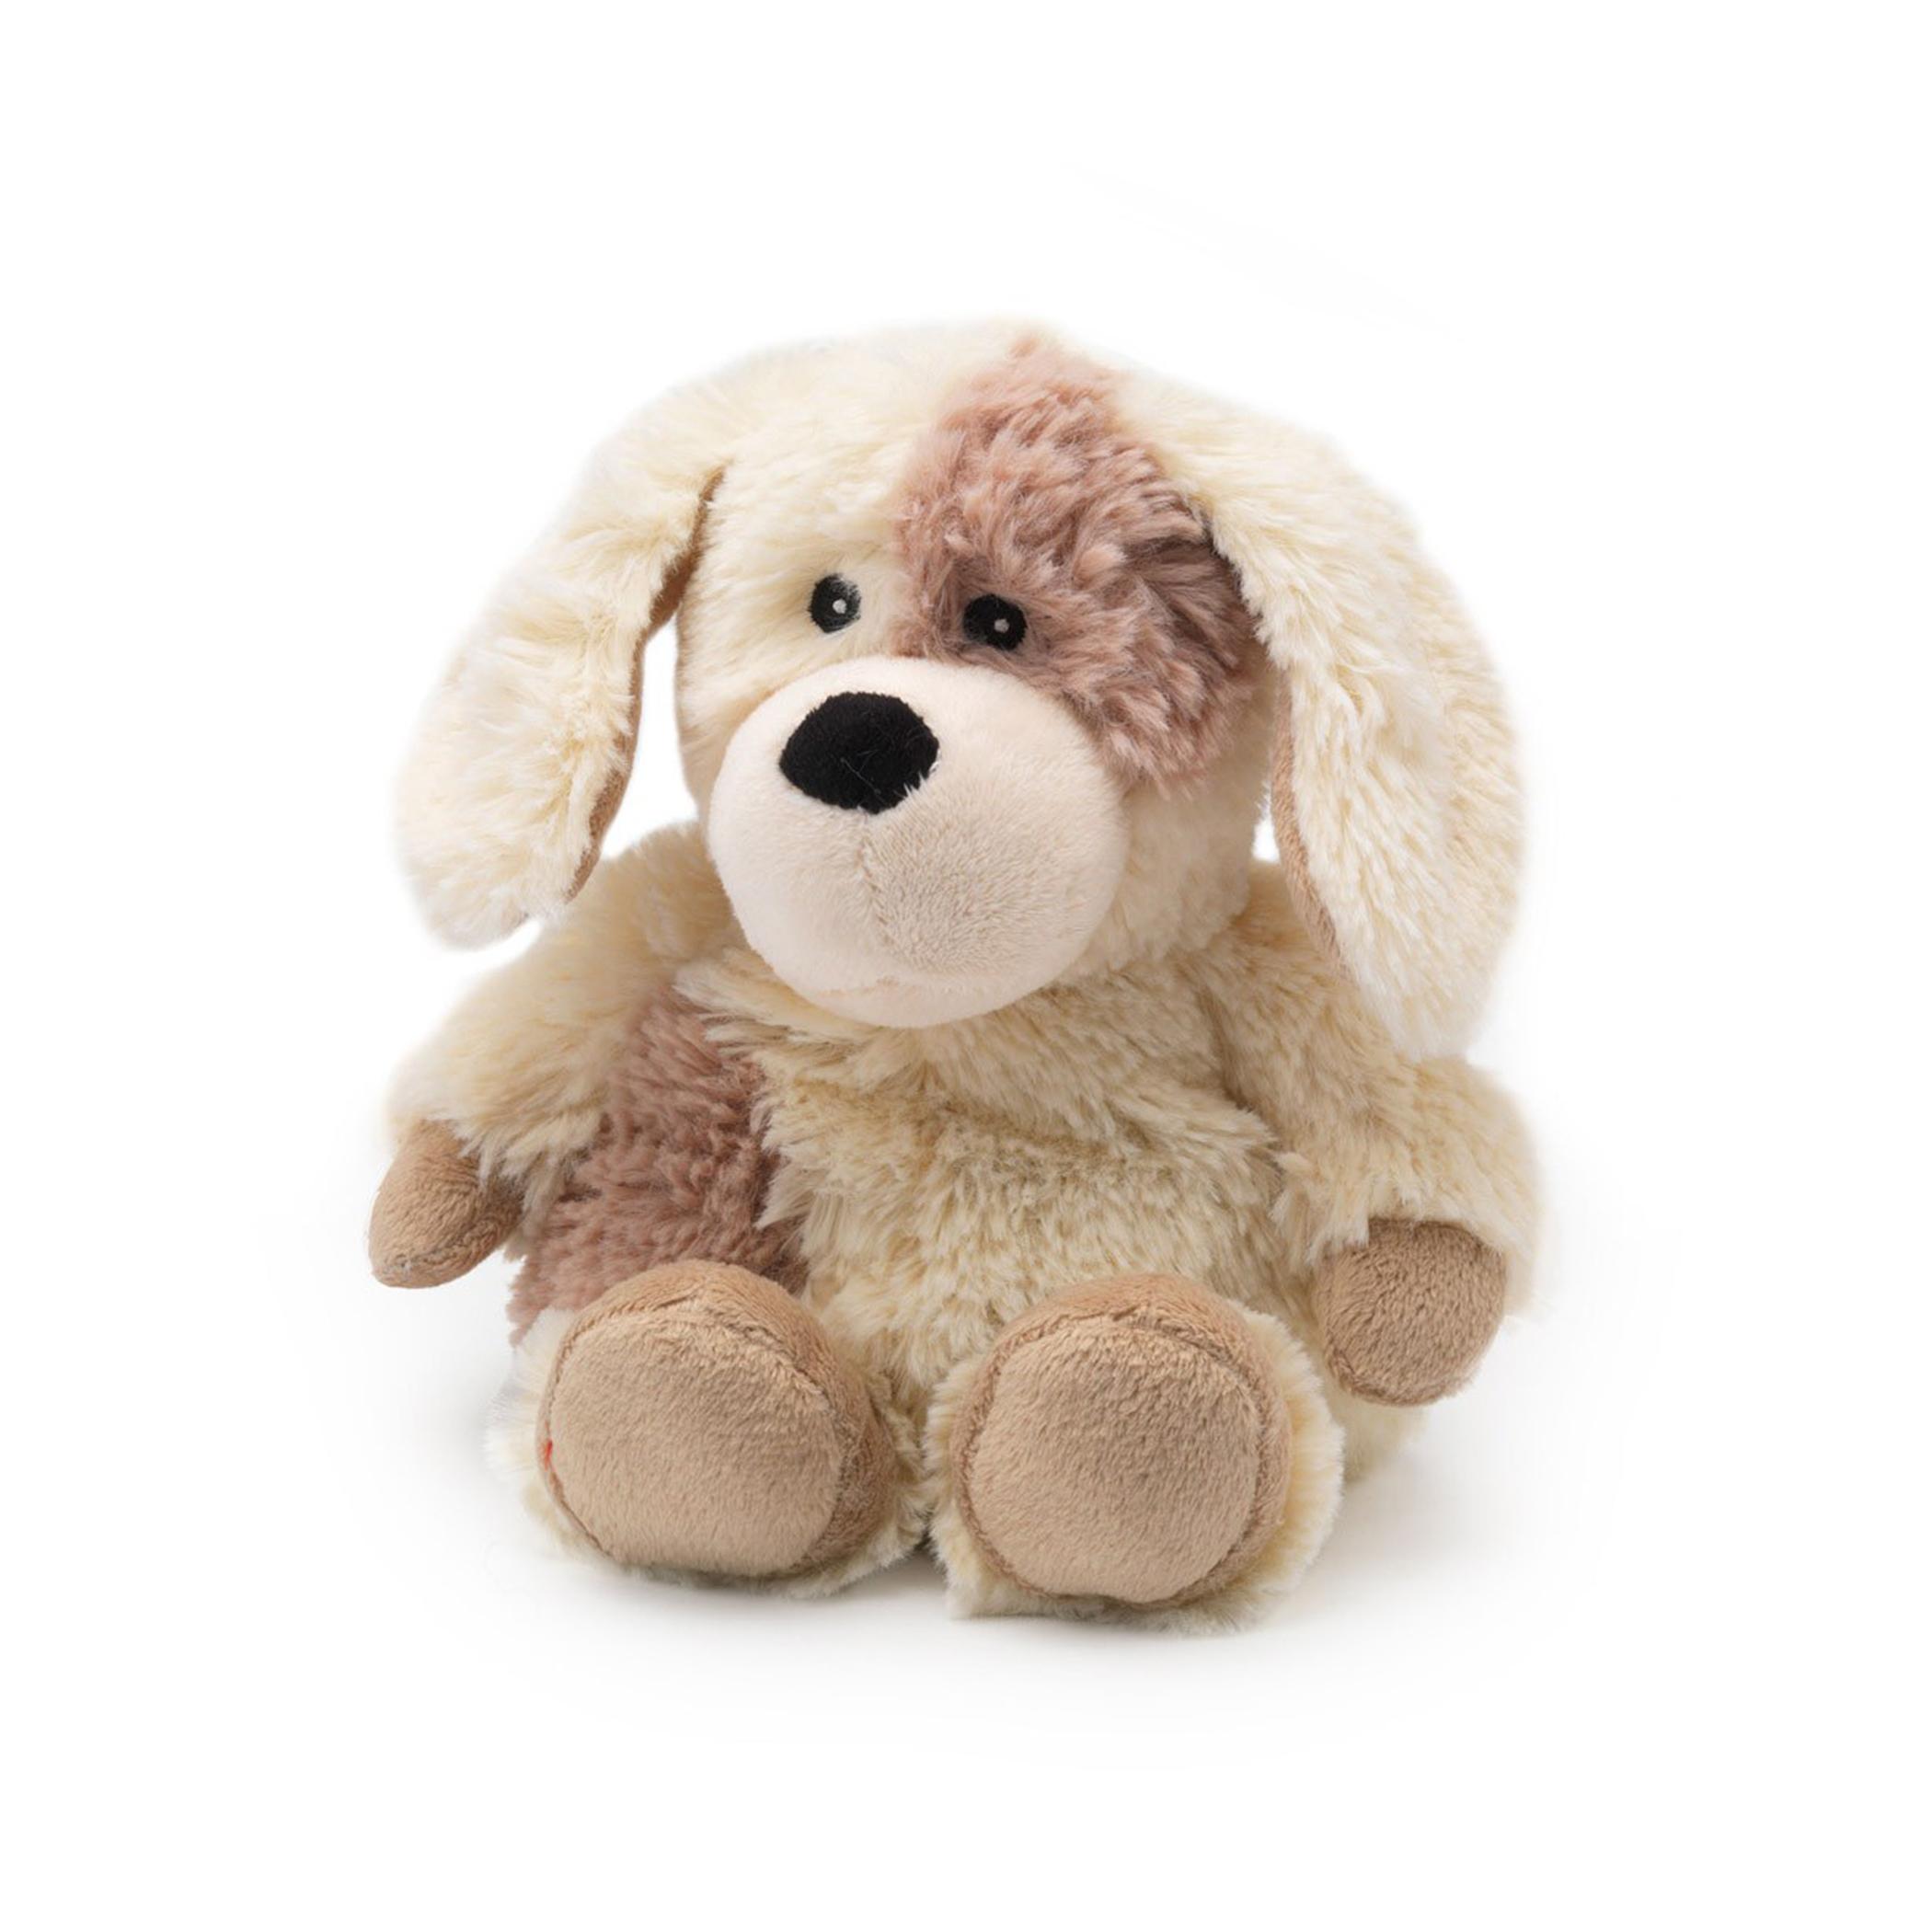 warm and cozy stuffed animals instructions